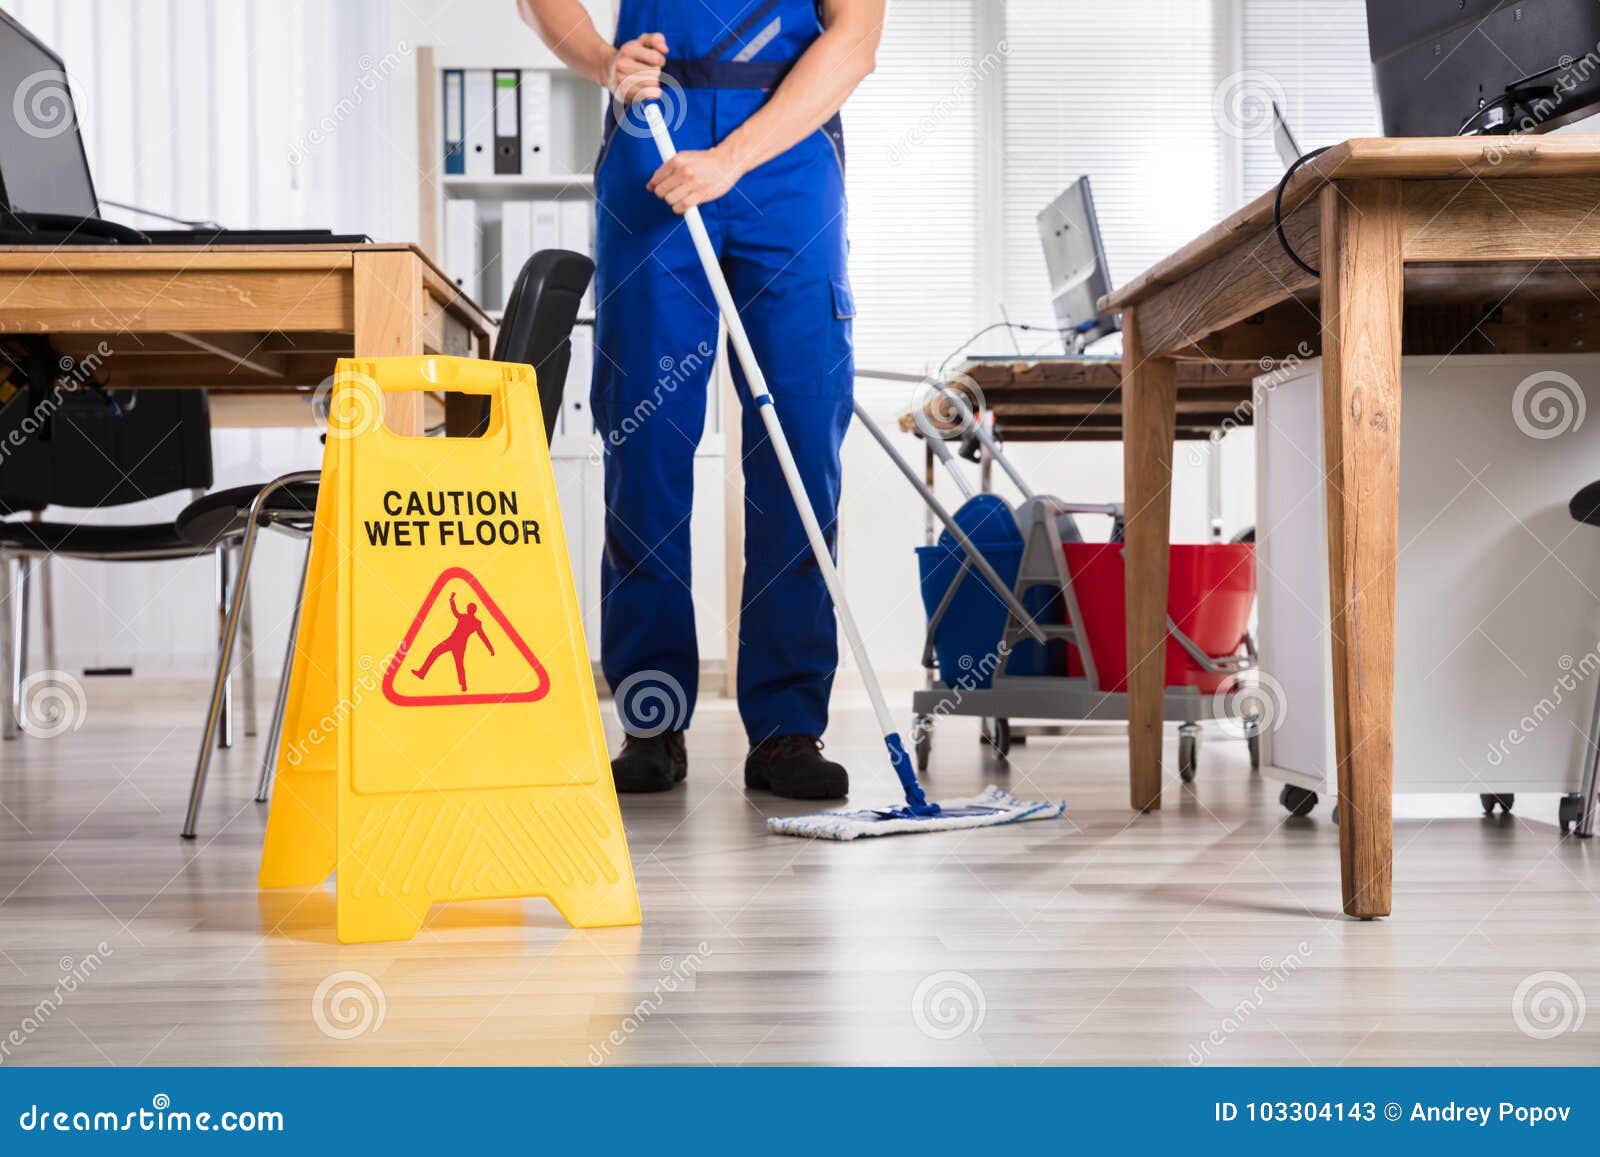 janitor cleaning floor in office